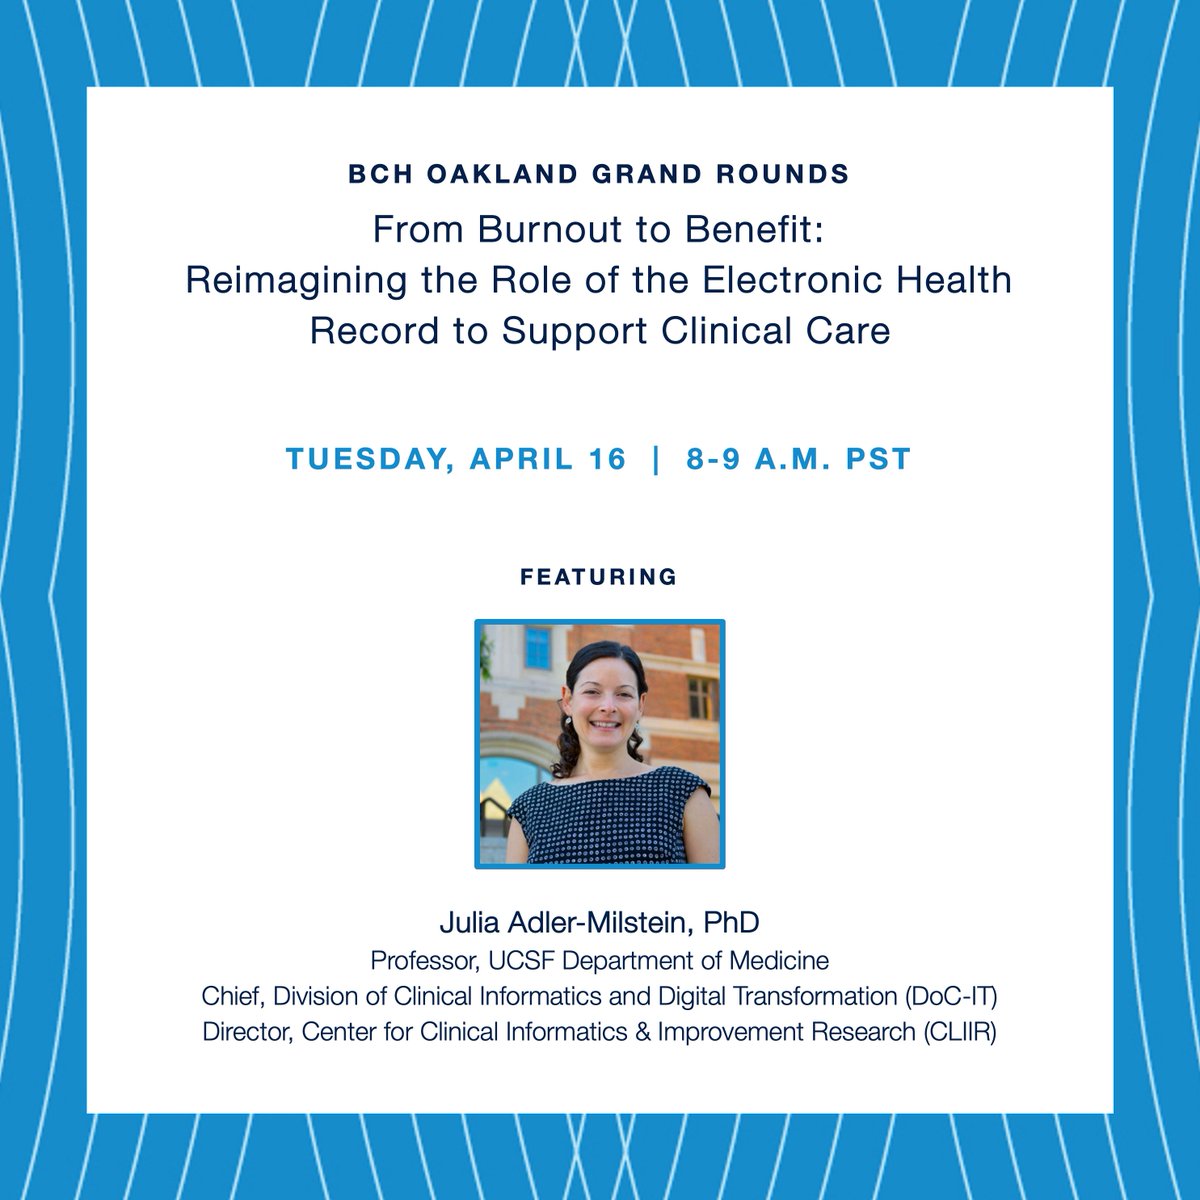 Mark your calendar! @j_r_a_m presents at the next @UCSFBenioffOAK Grand Rounds on the role of EHR to support clinical care, focusing on clinician burnout, ways to redesign EHR, and integrating the data into QI and research efforts. Click to learn more. docit.ucsf.edu/events/grand-r…